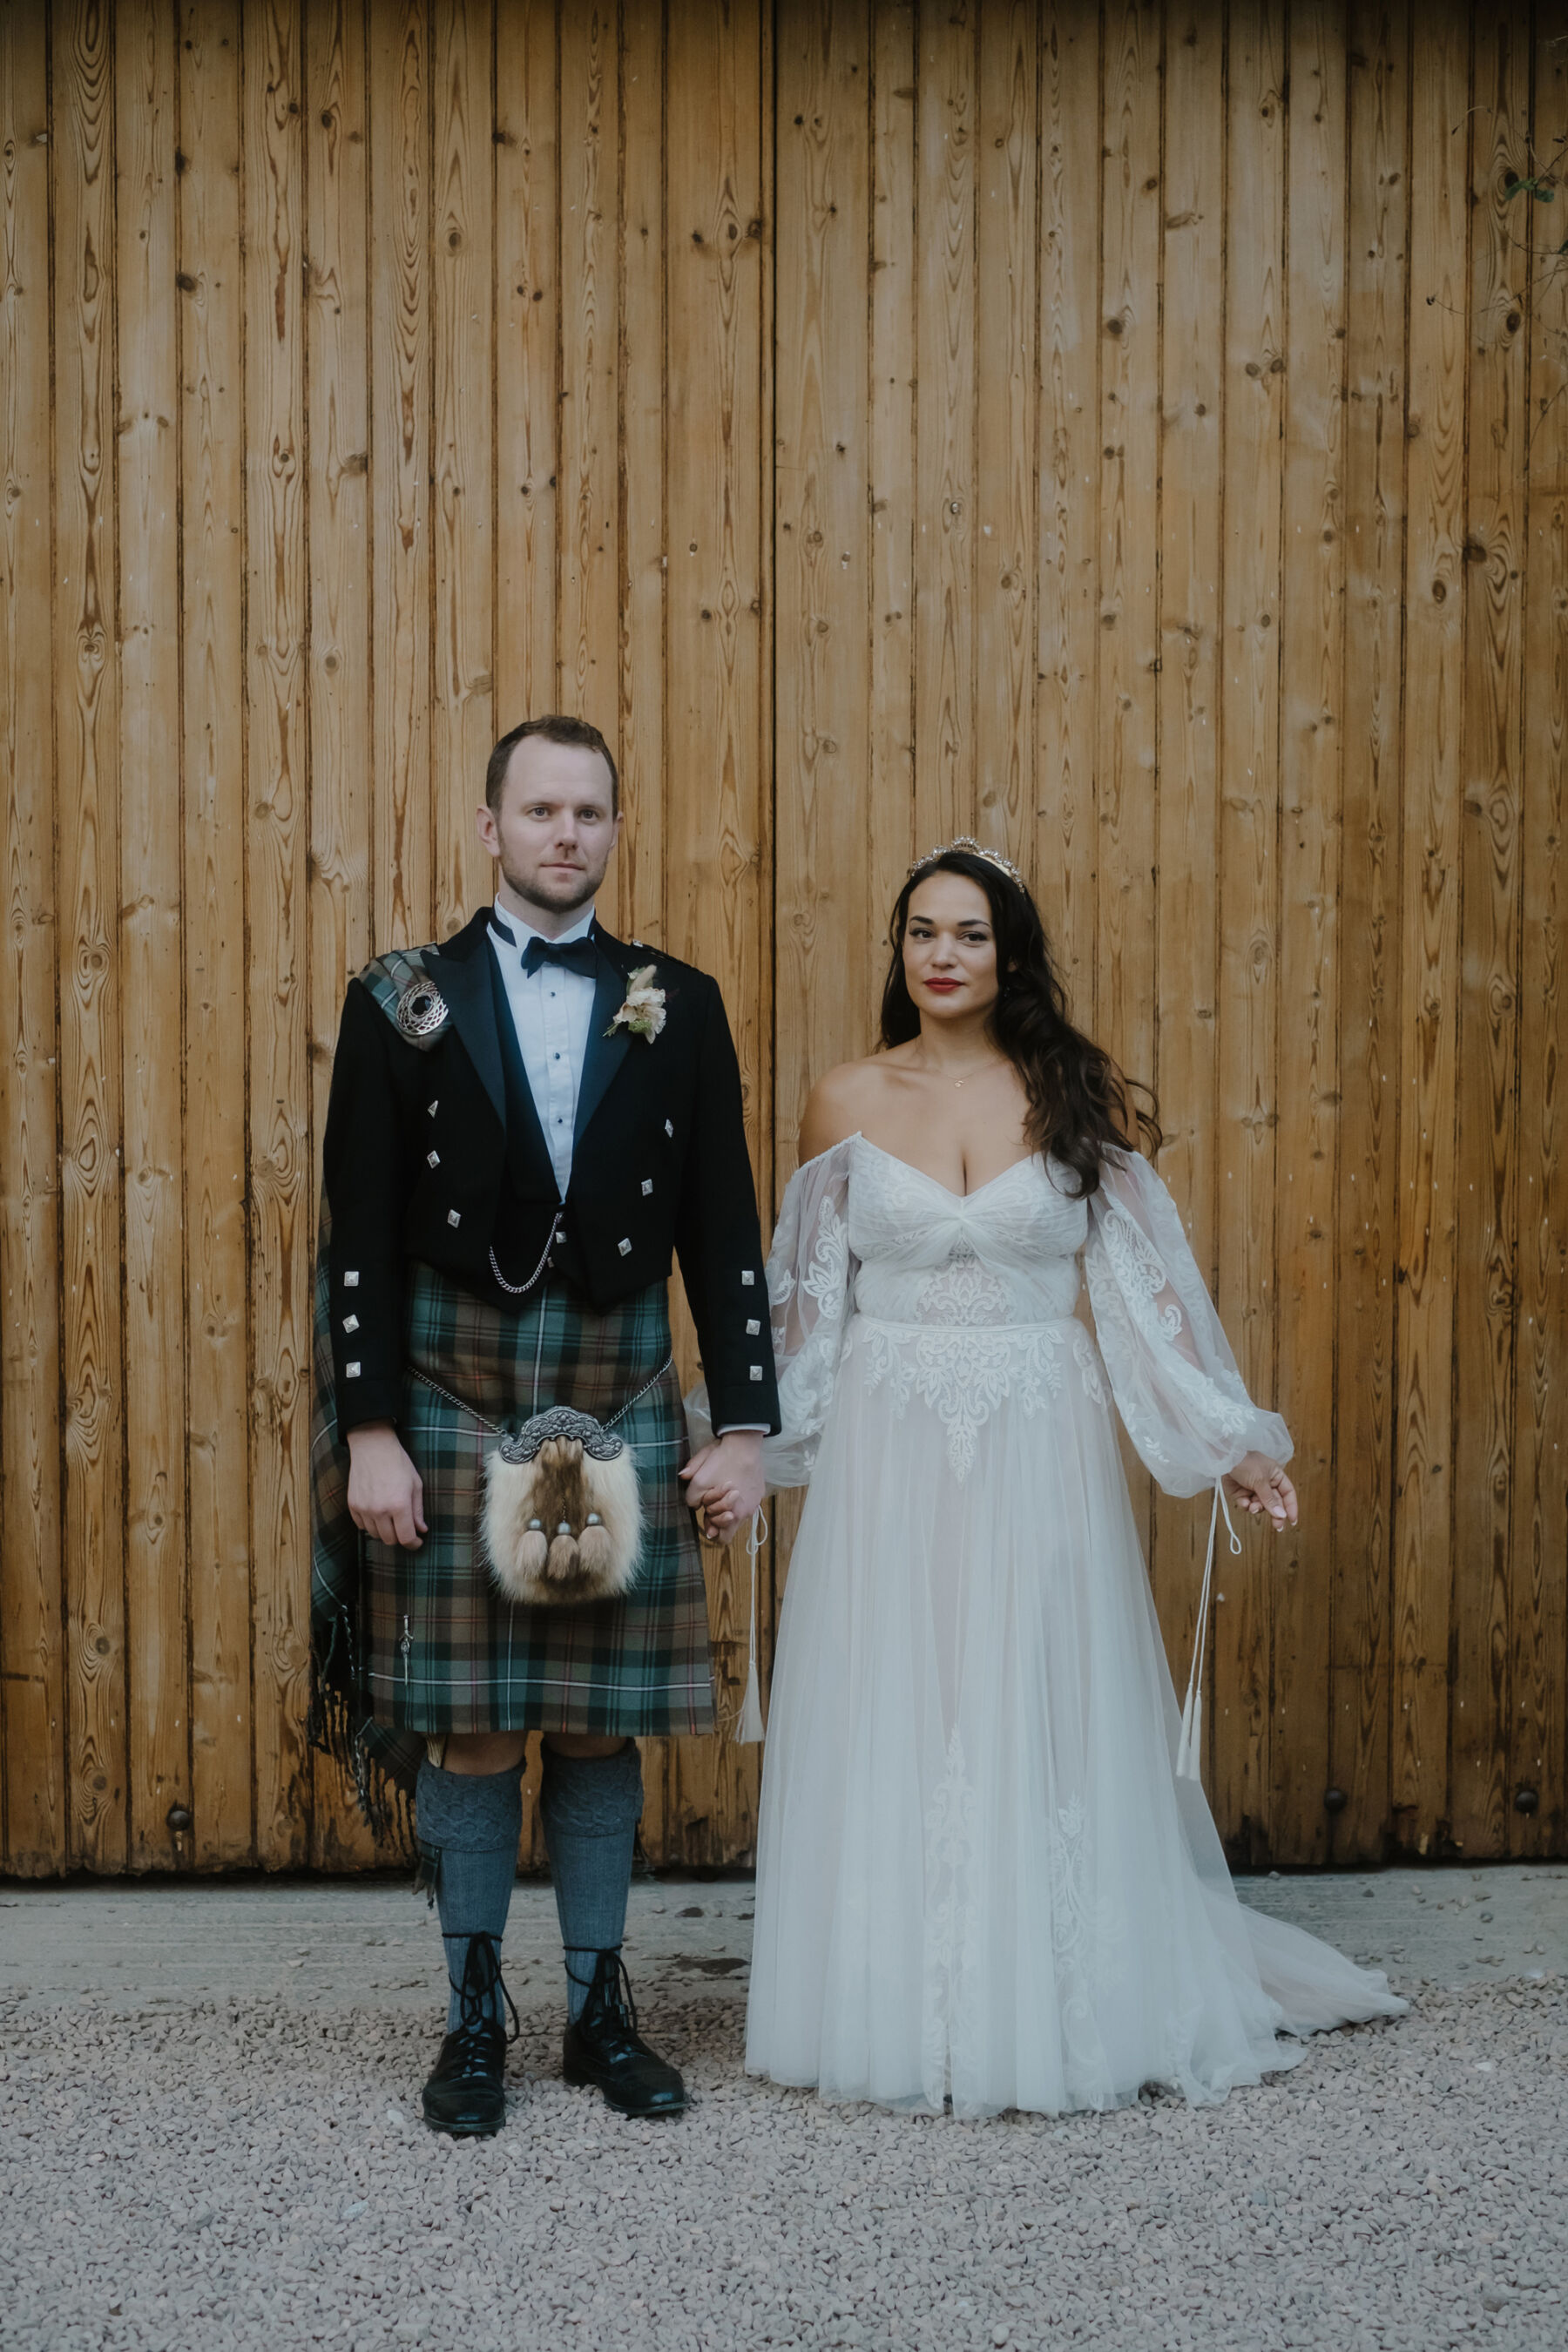 Groom wearing a green holding hands. Groom wears a green and blue tartan kilt and fly plaid with a sporran. Bride wears an off the shoulder wedding dress by Watters. She has long dark loose hair, red lipstick and pale pink nails.